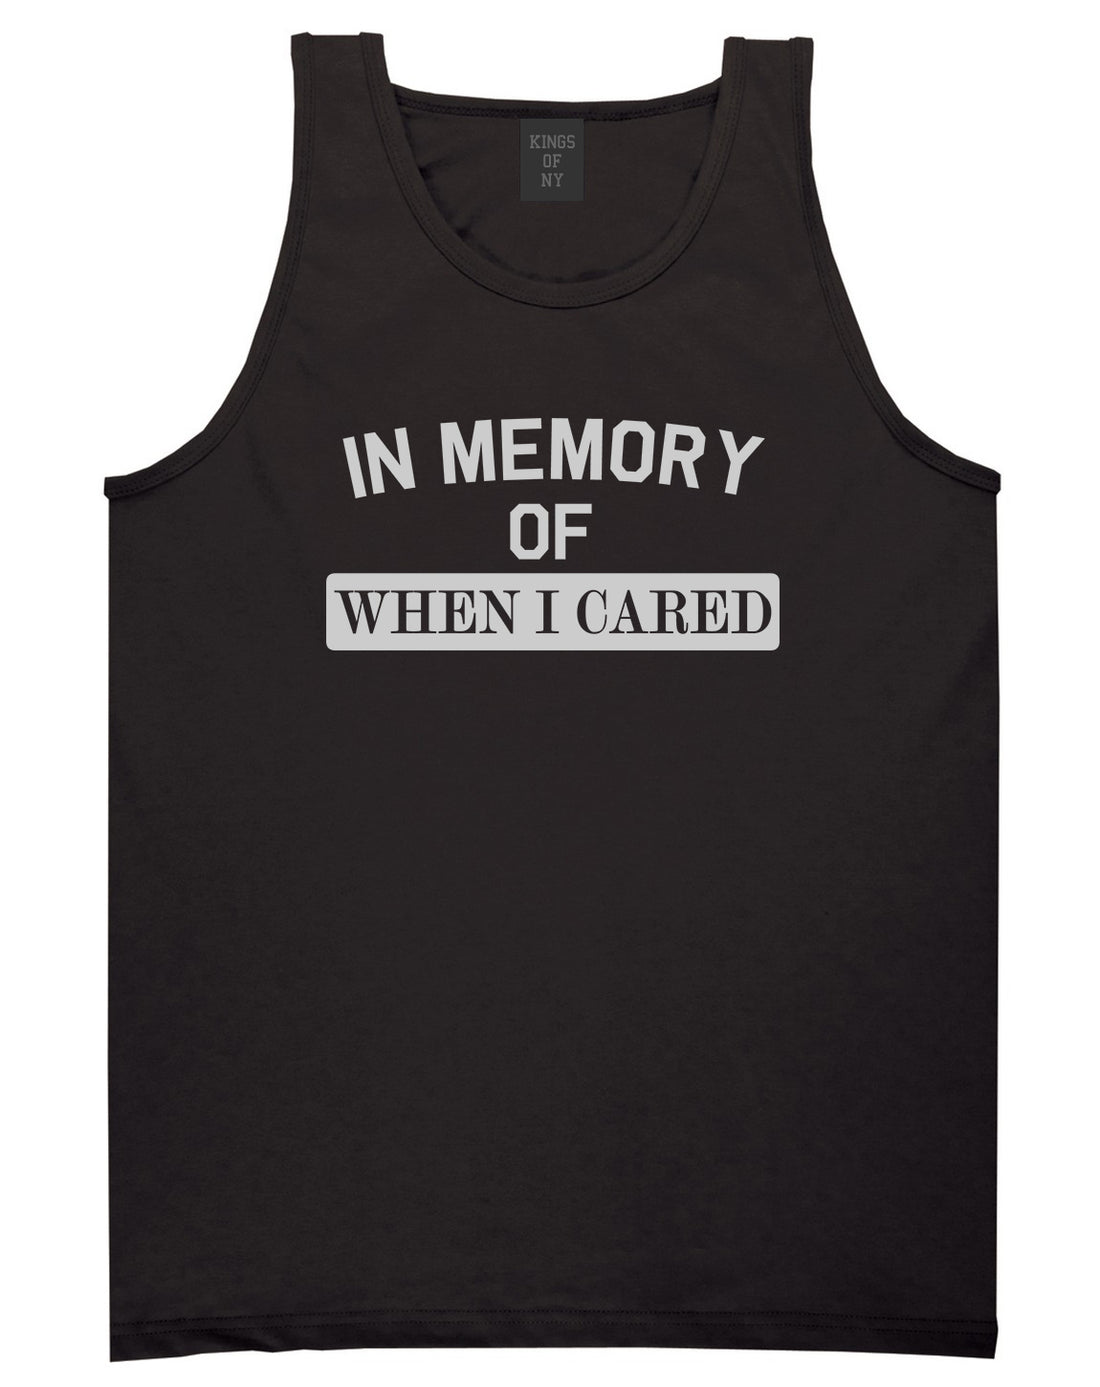 In Memory Of When I Cared Mens Tank Top T-Shirt Black